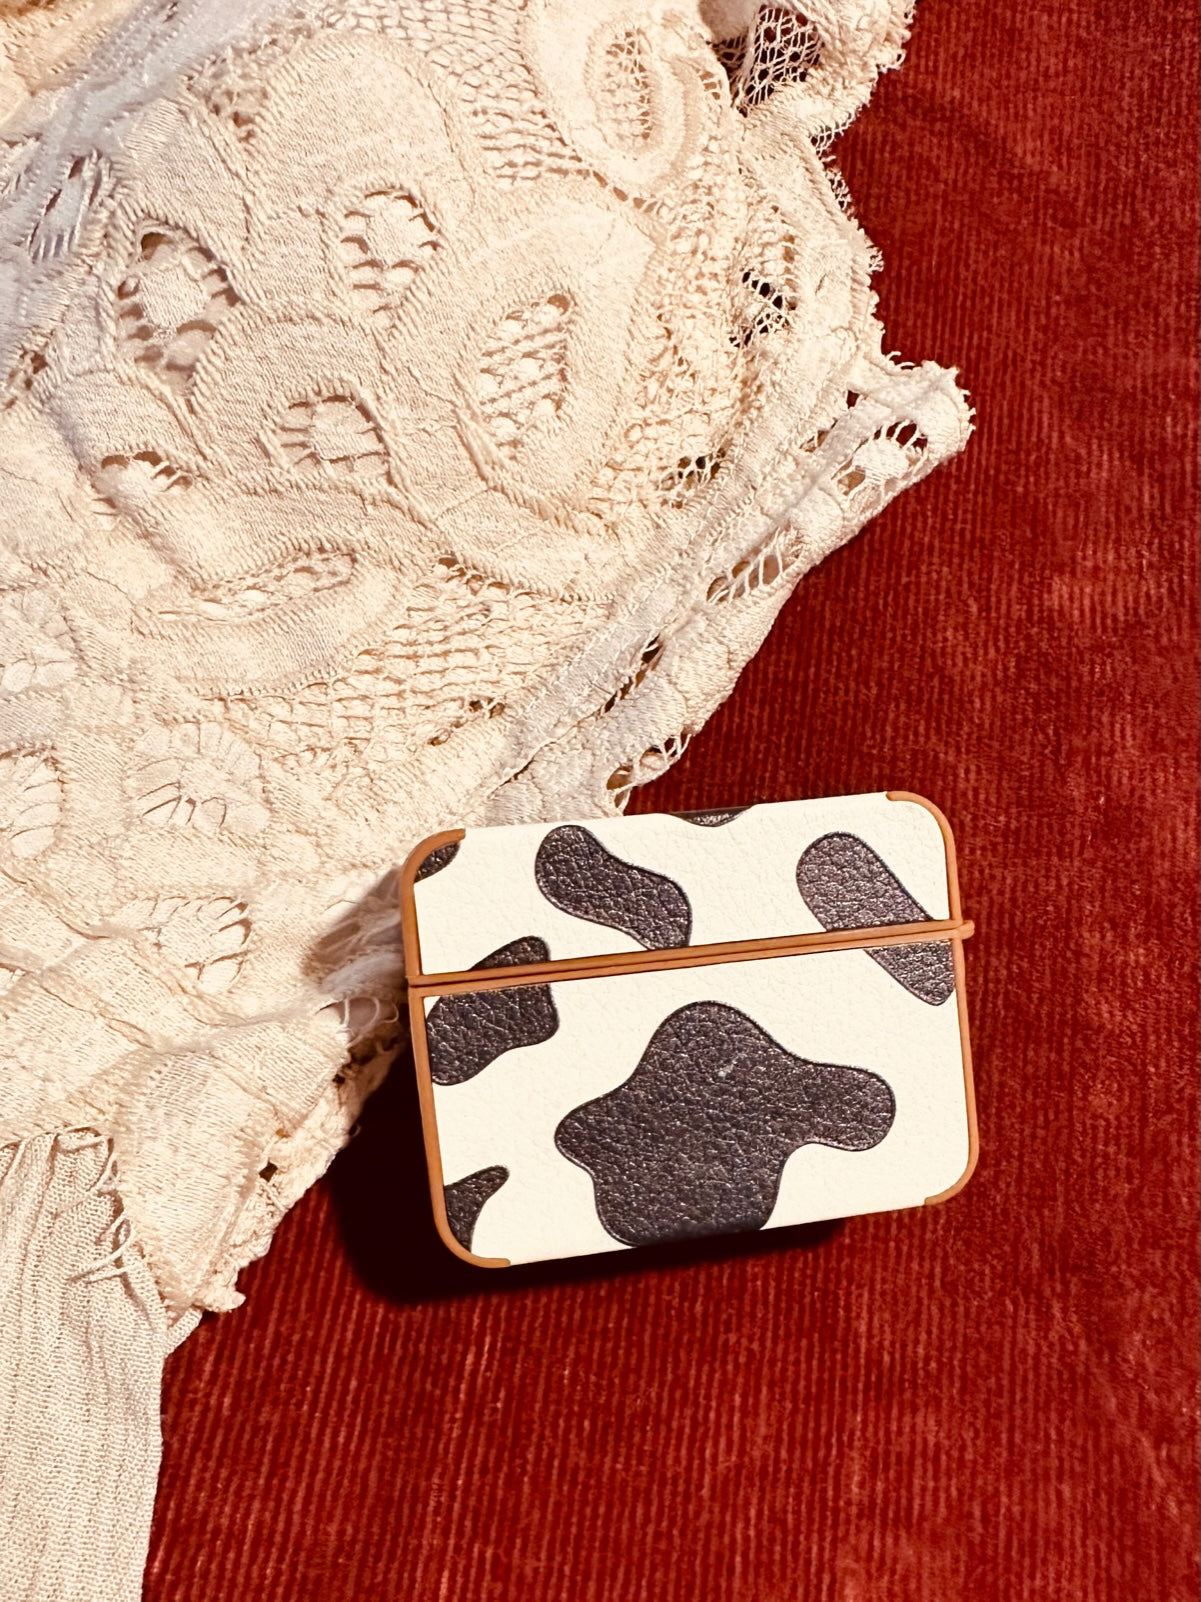 Cow Print Leather Airpod Case